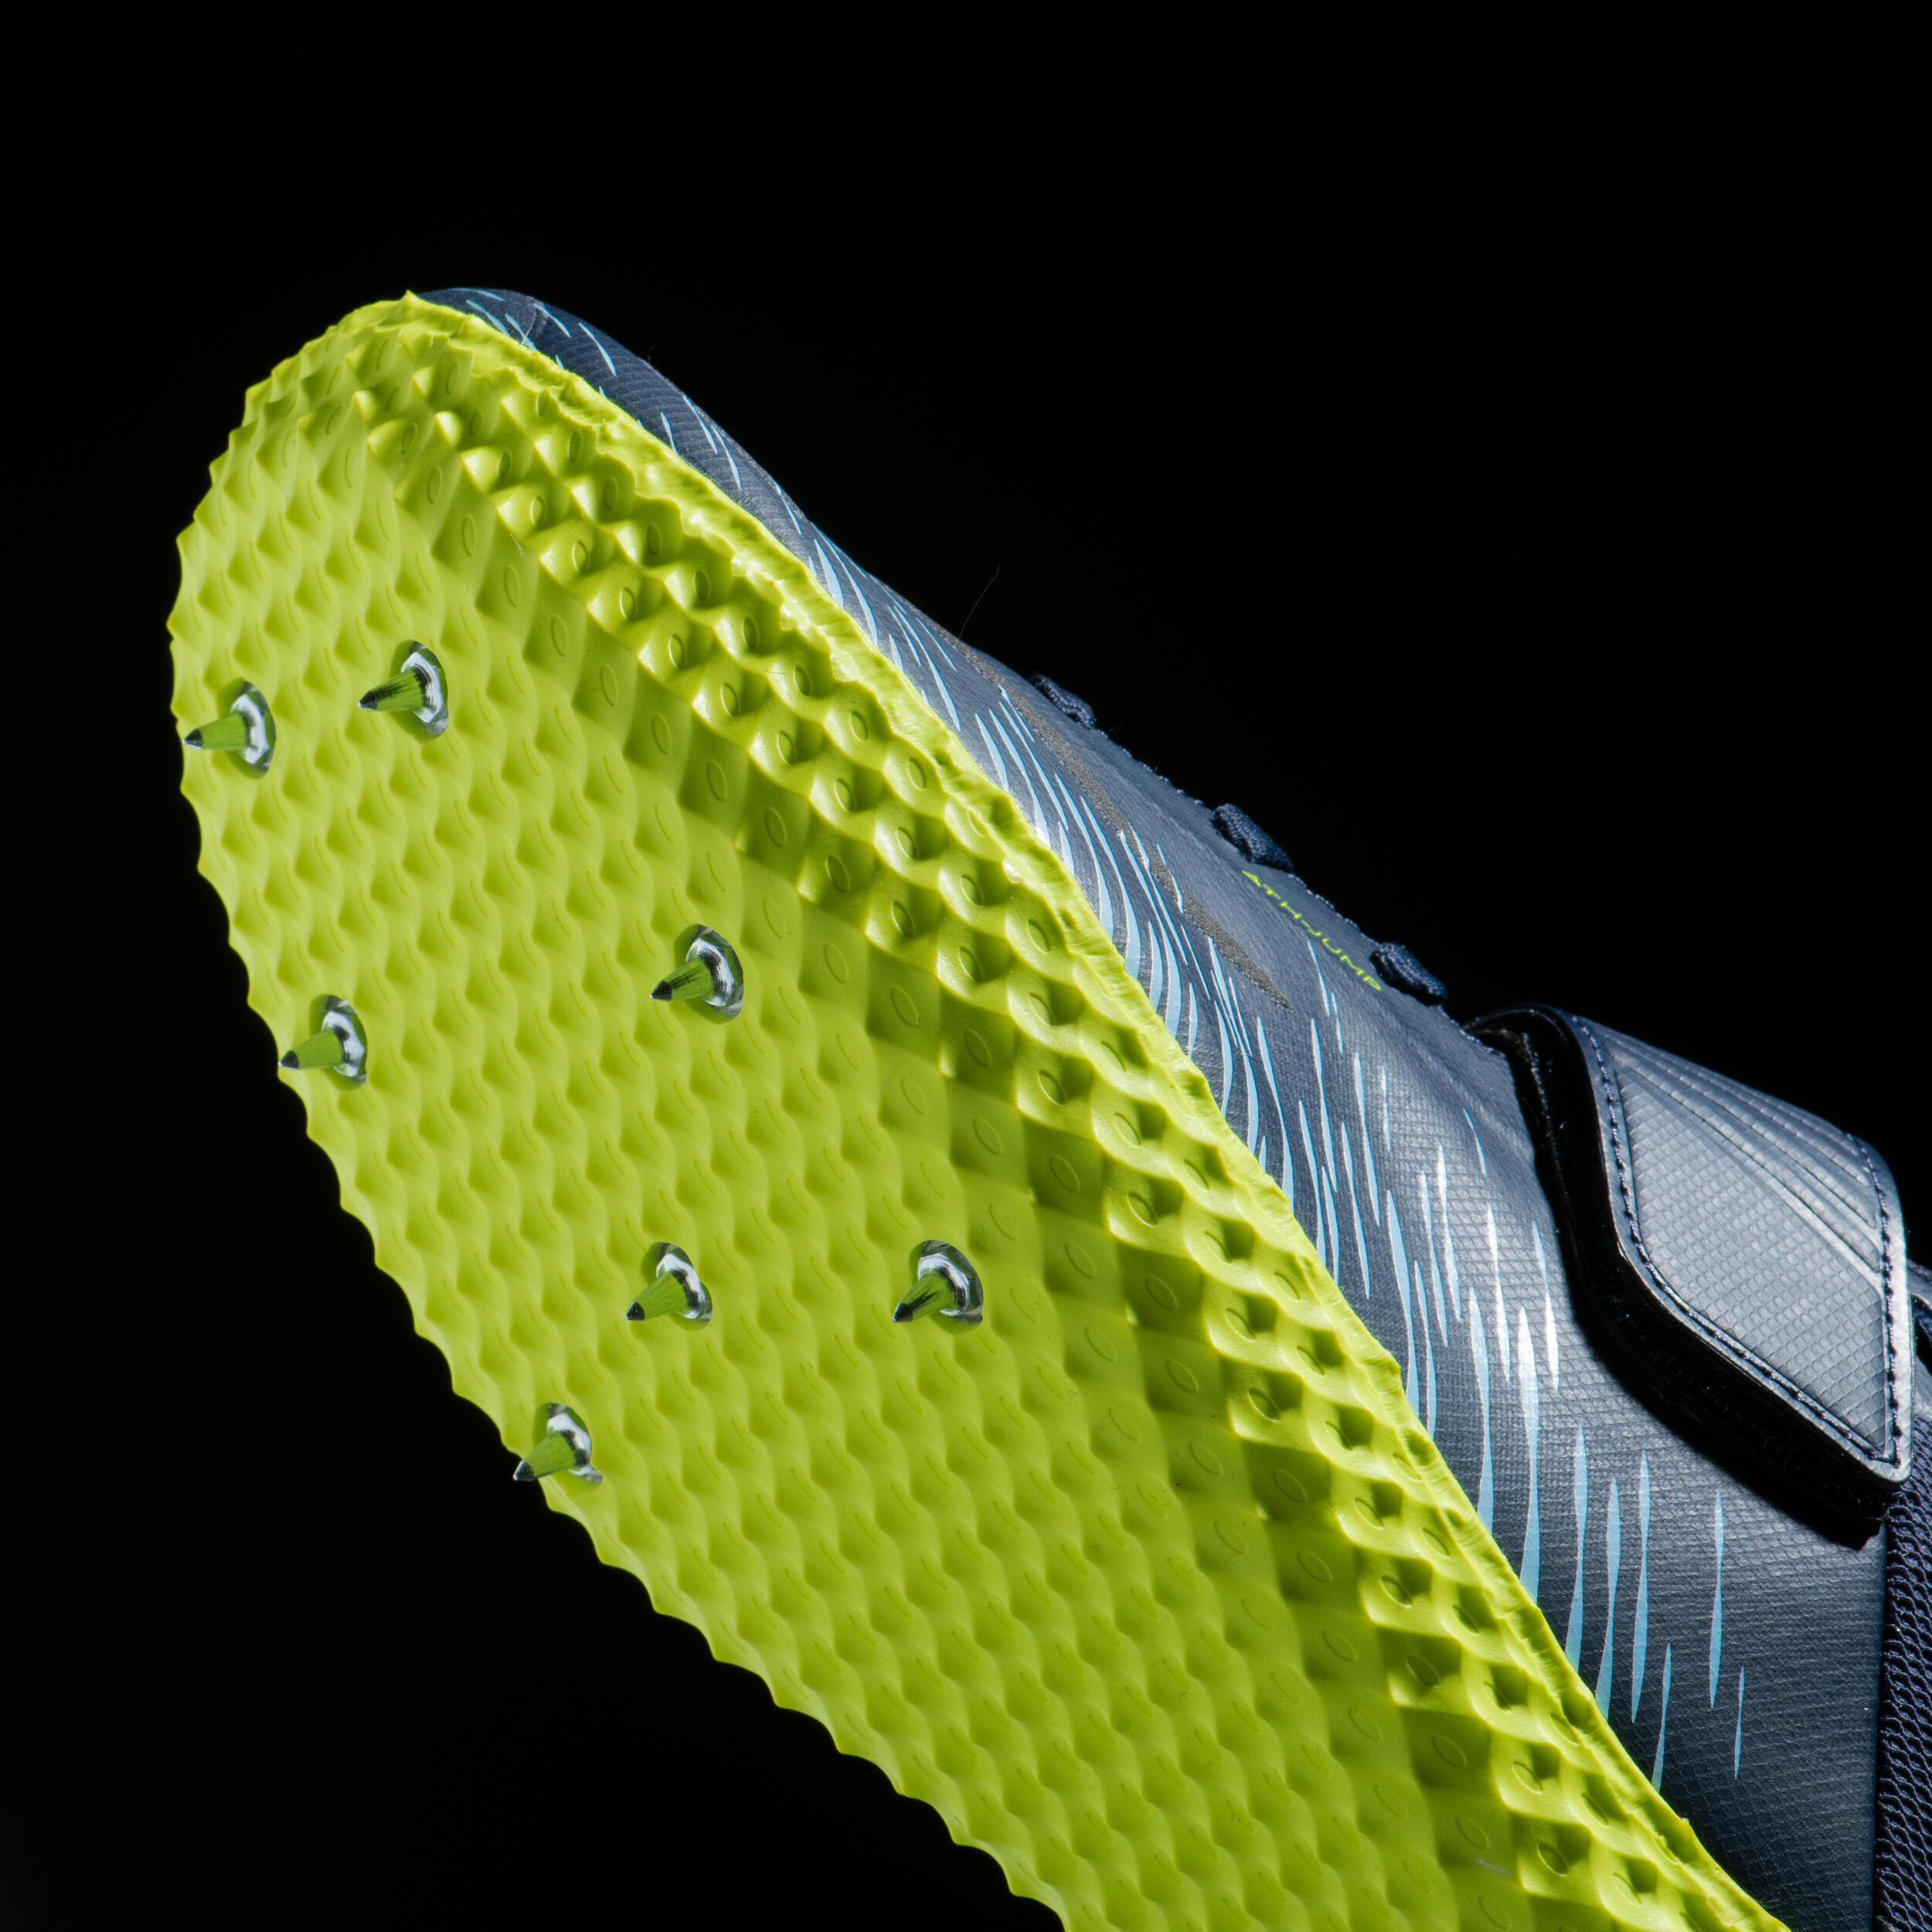 AT HIGH JUMP SPIKED SHOES SPECIFICALLY FOR THE HIGH JUMP 4/8